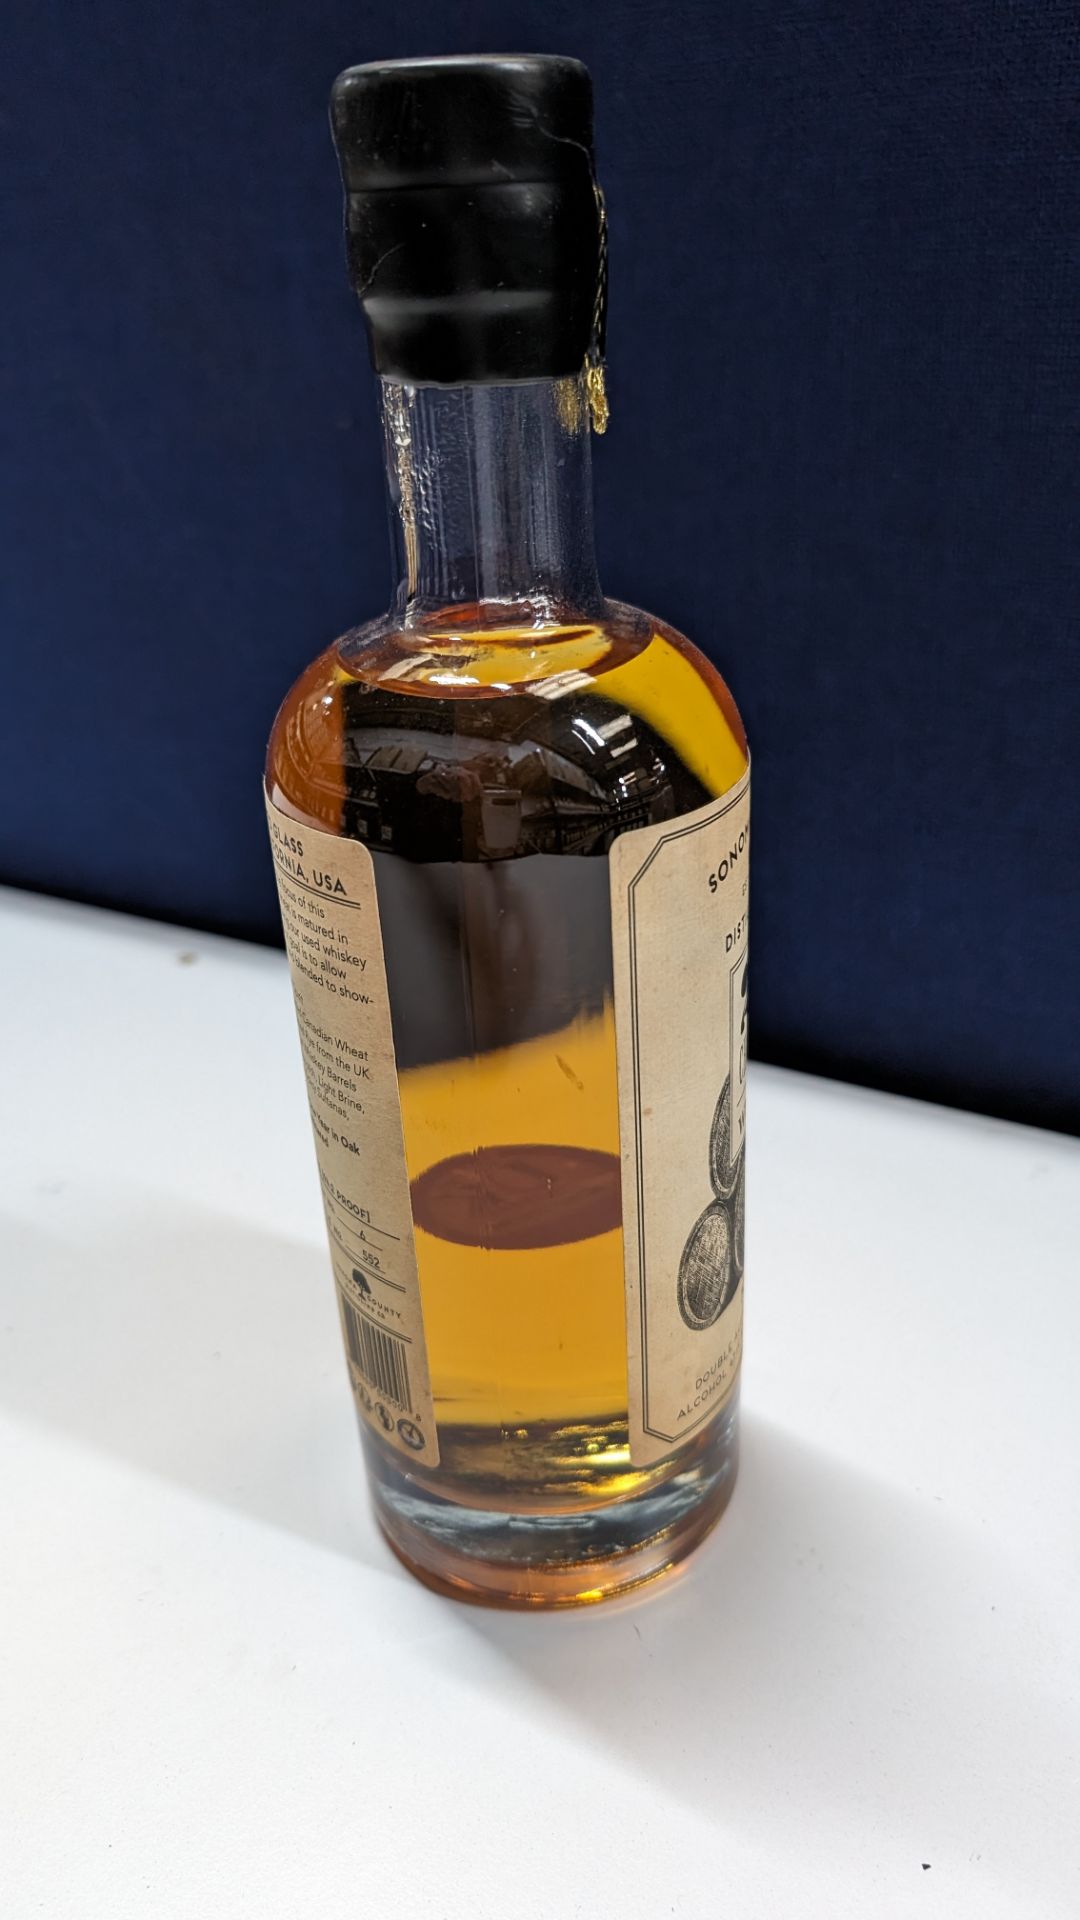 1 off 700ml bottle of Sonoma County 2nd Chance Wheat Double Alembic Pot Distilled Whiskey. 47.1% al - Bild 4 aus 6